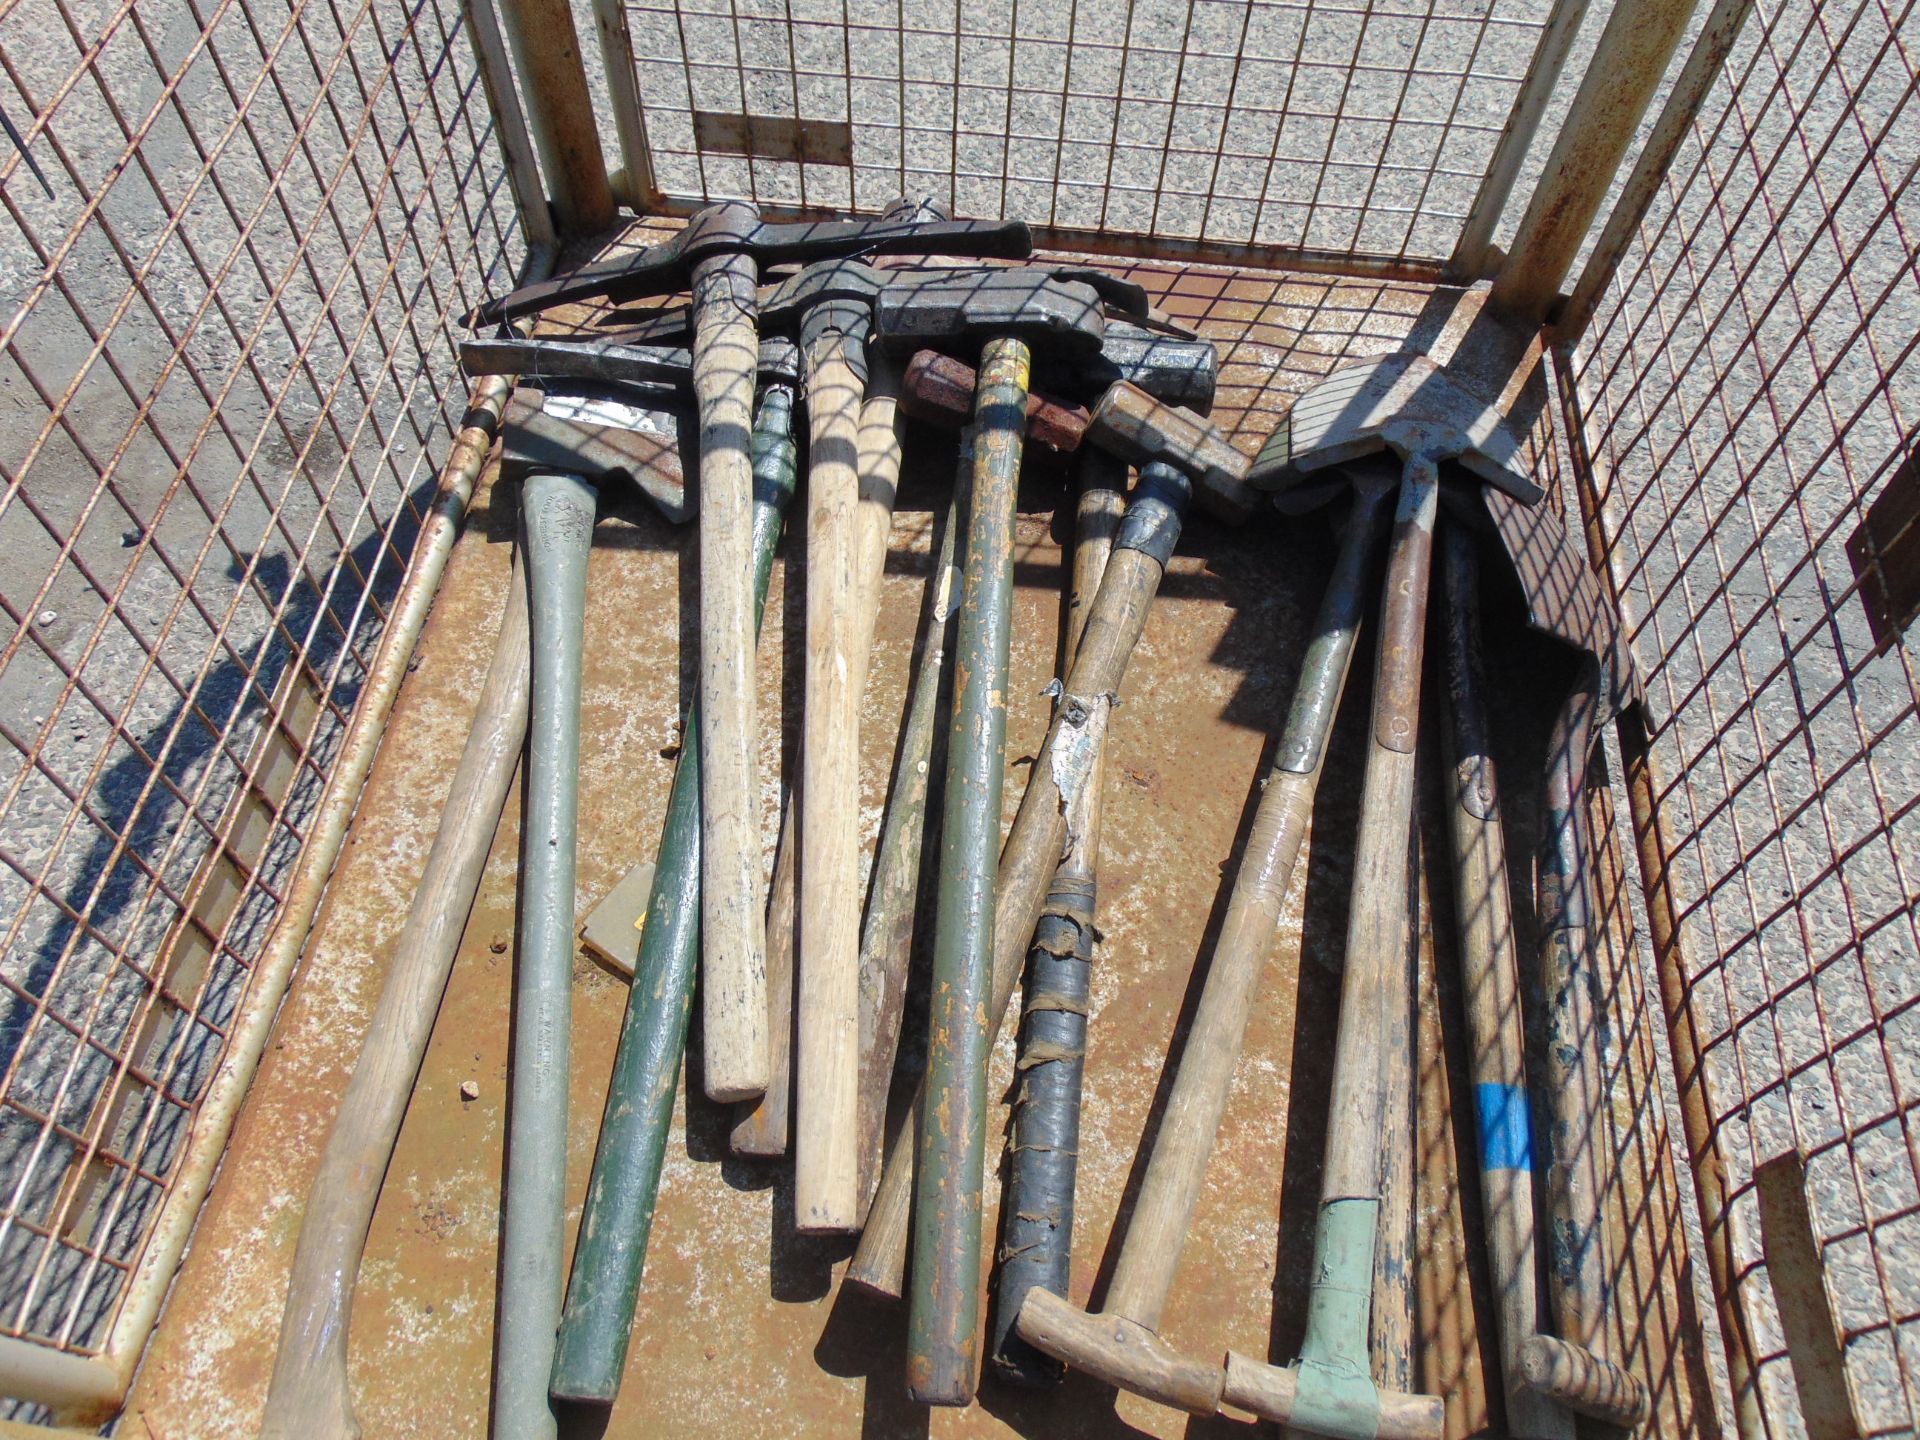 15 x Picks Shovels, Axes and Sledge Hammers - Image 4 of 4